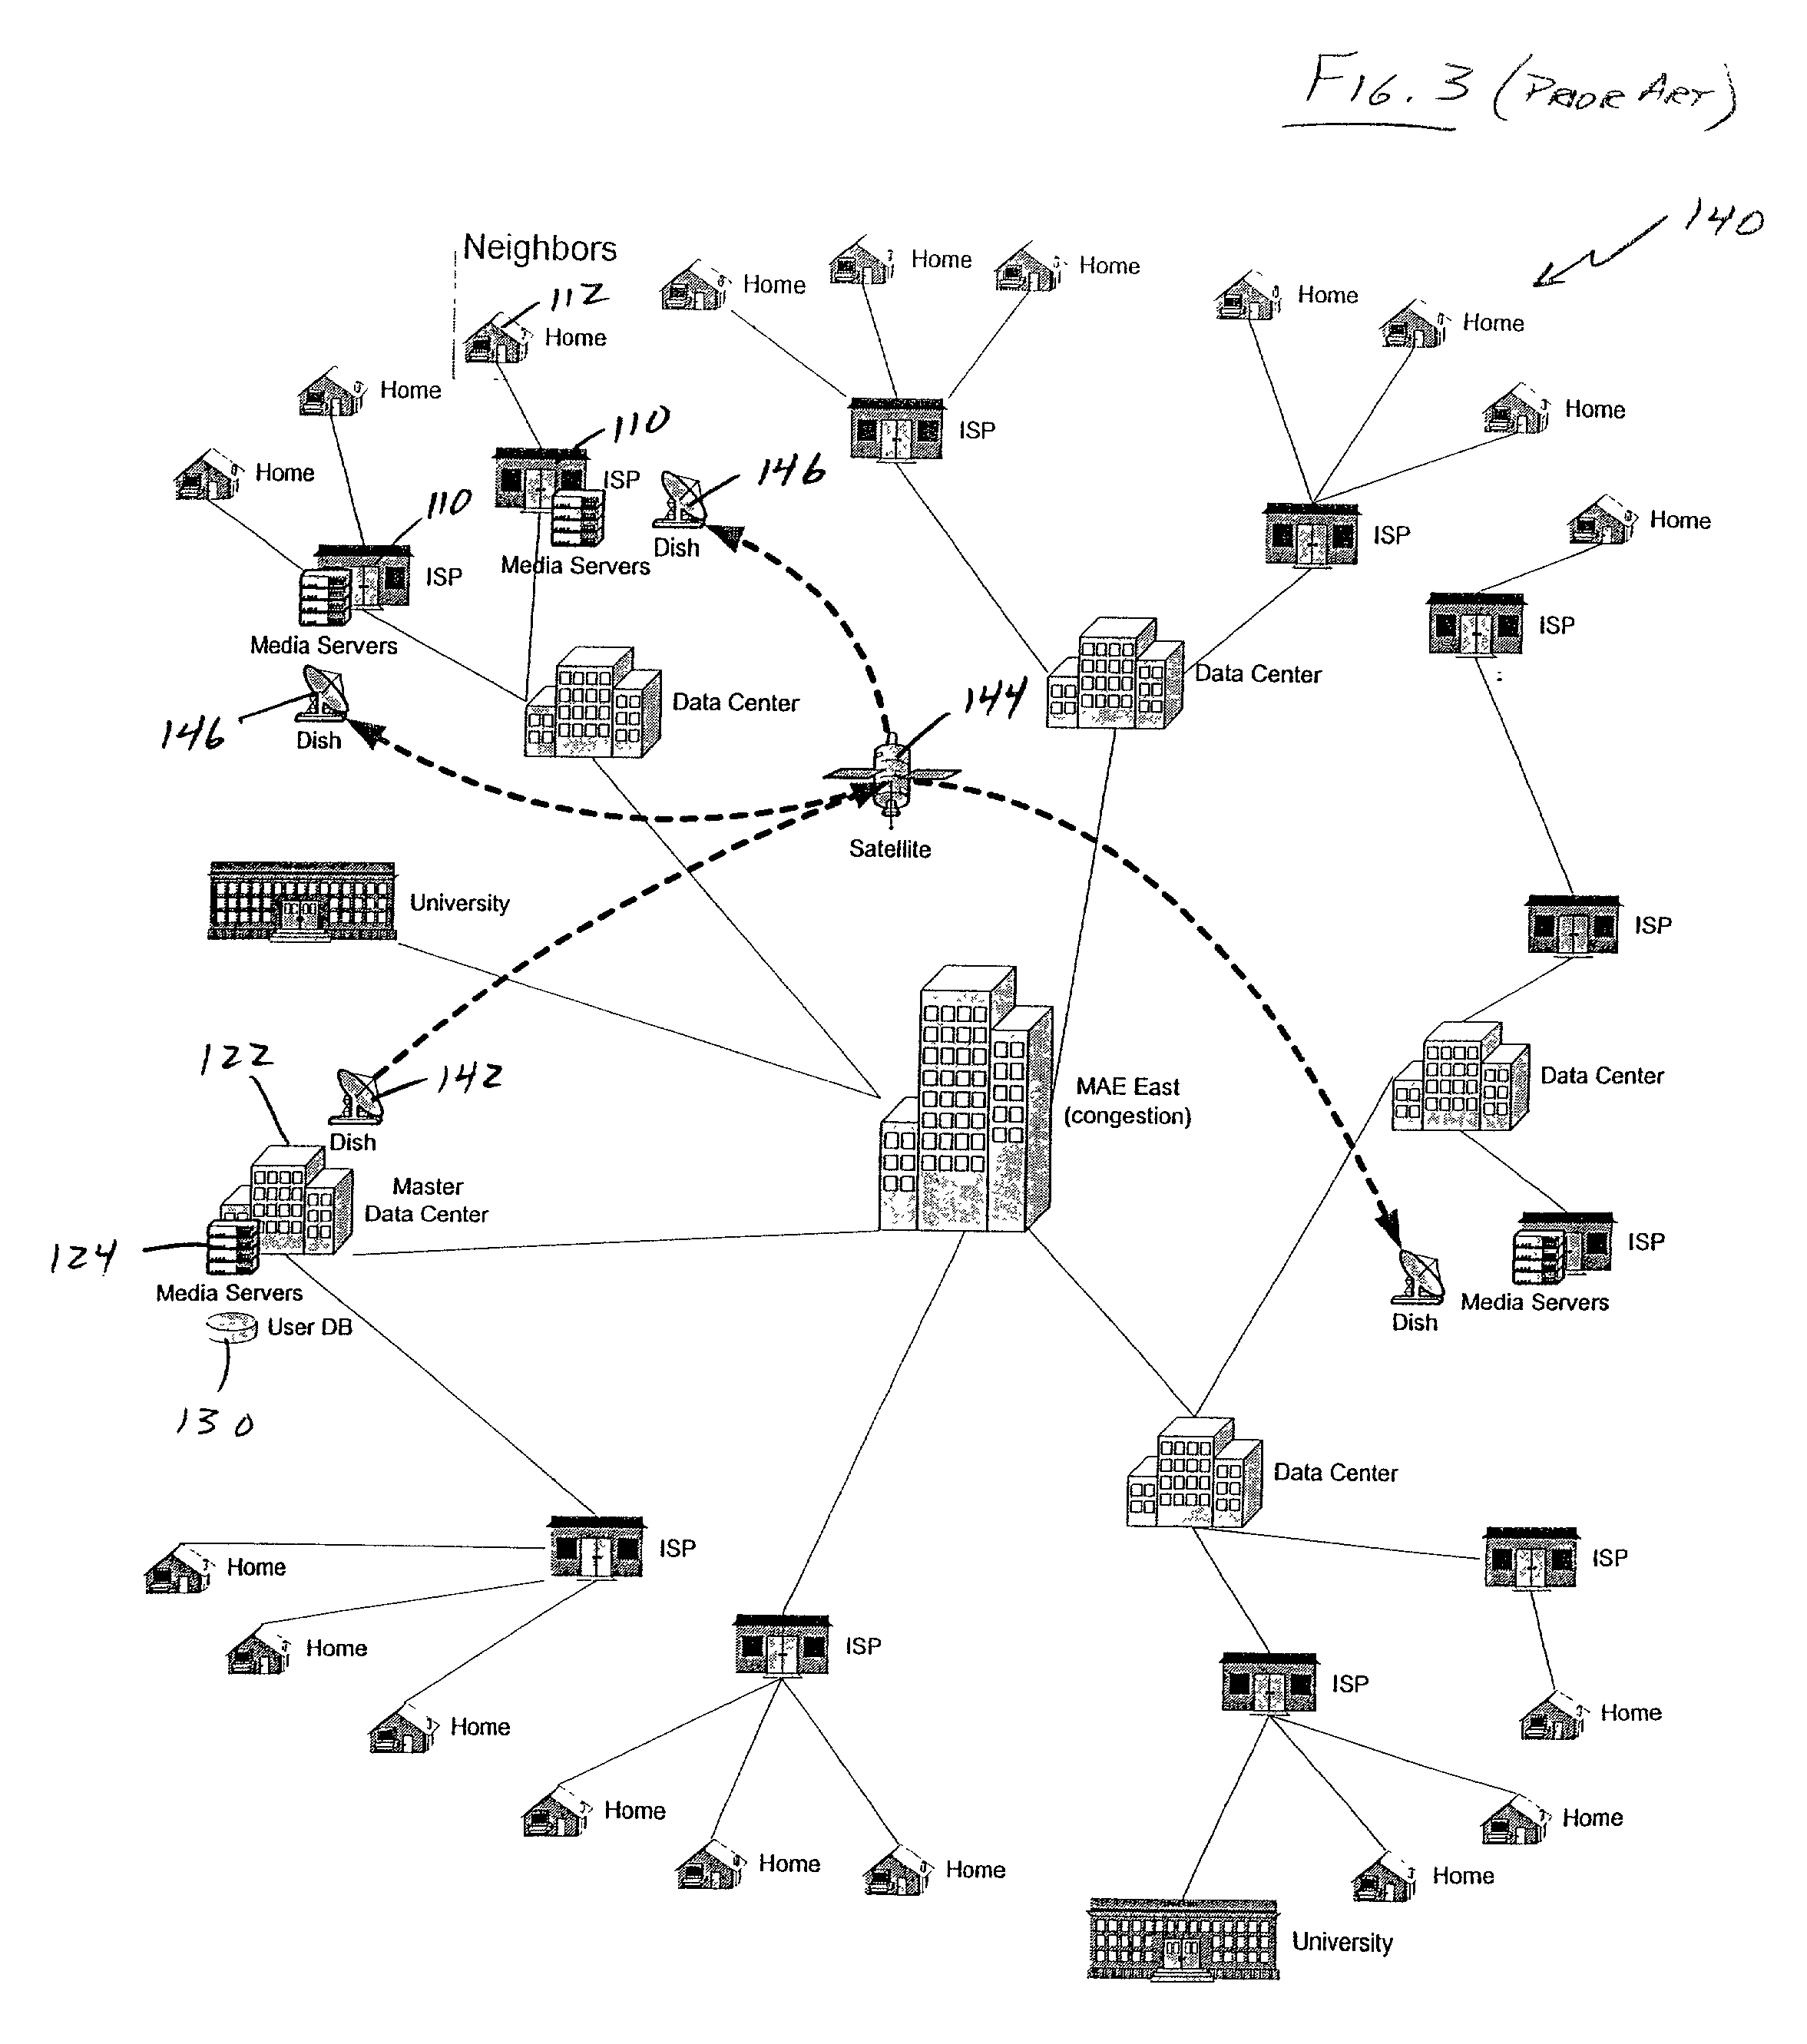 Network communication system including metaswitch functionality